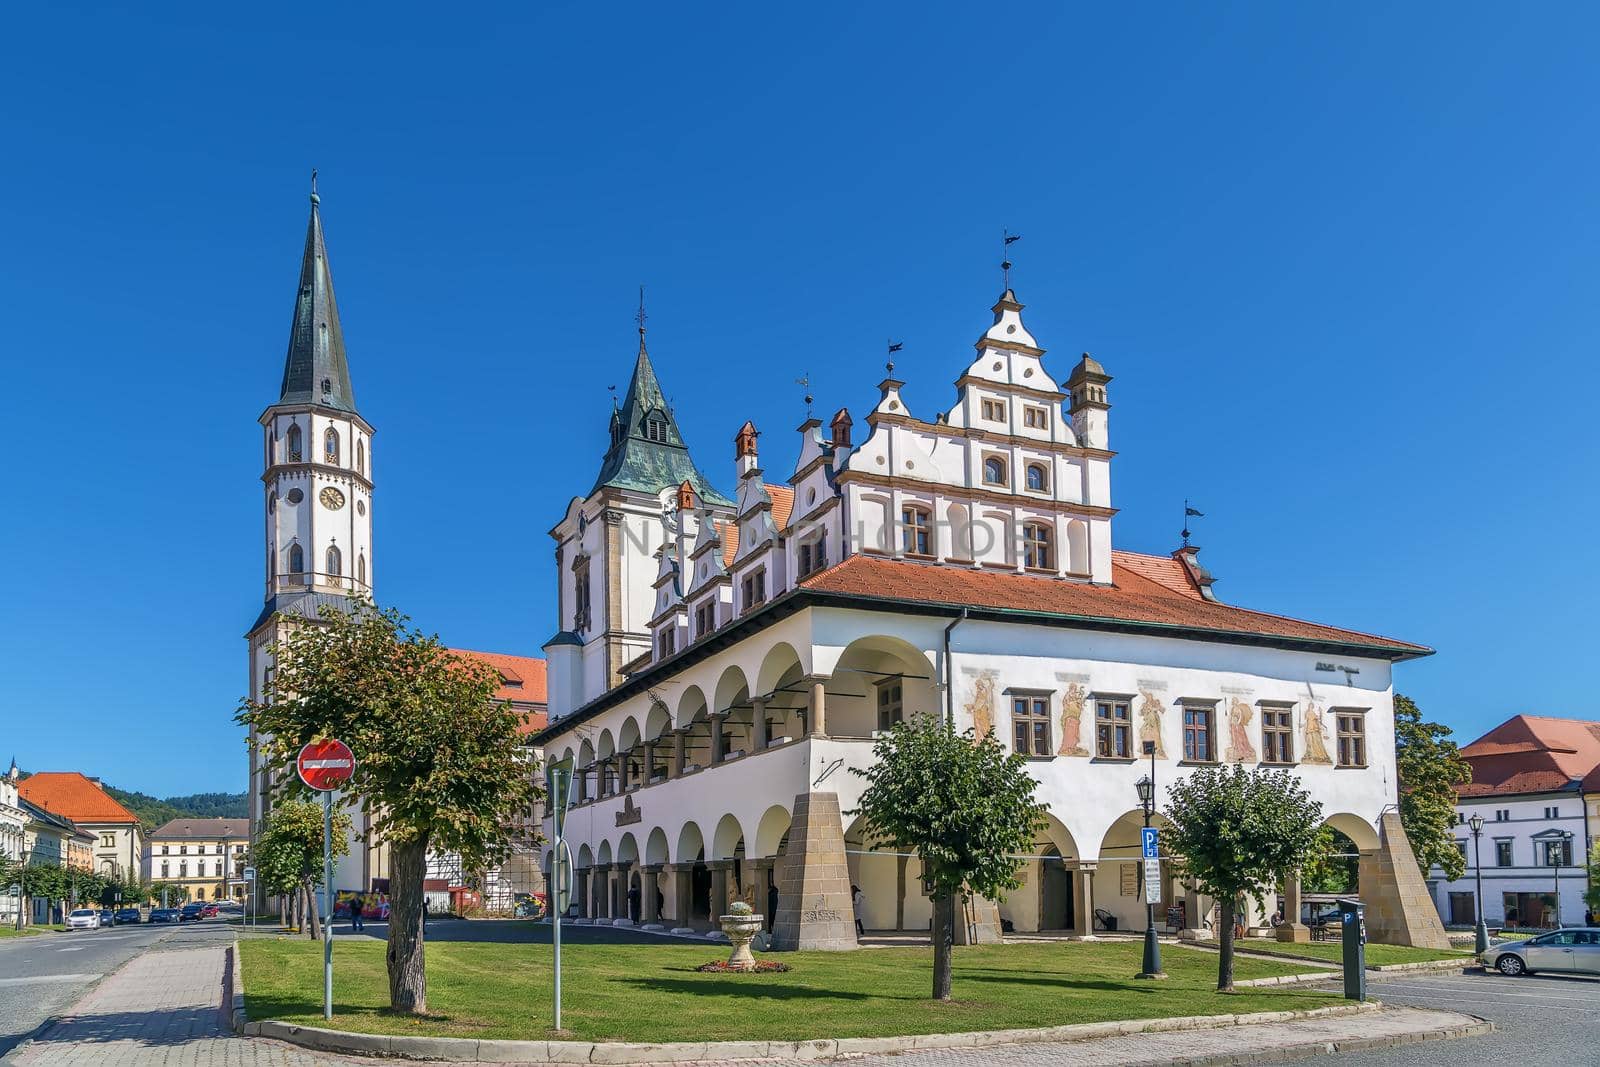 Basilica of St. James and Old Town Hall, Levoca, Slovakia by borisb17